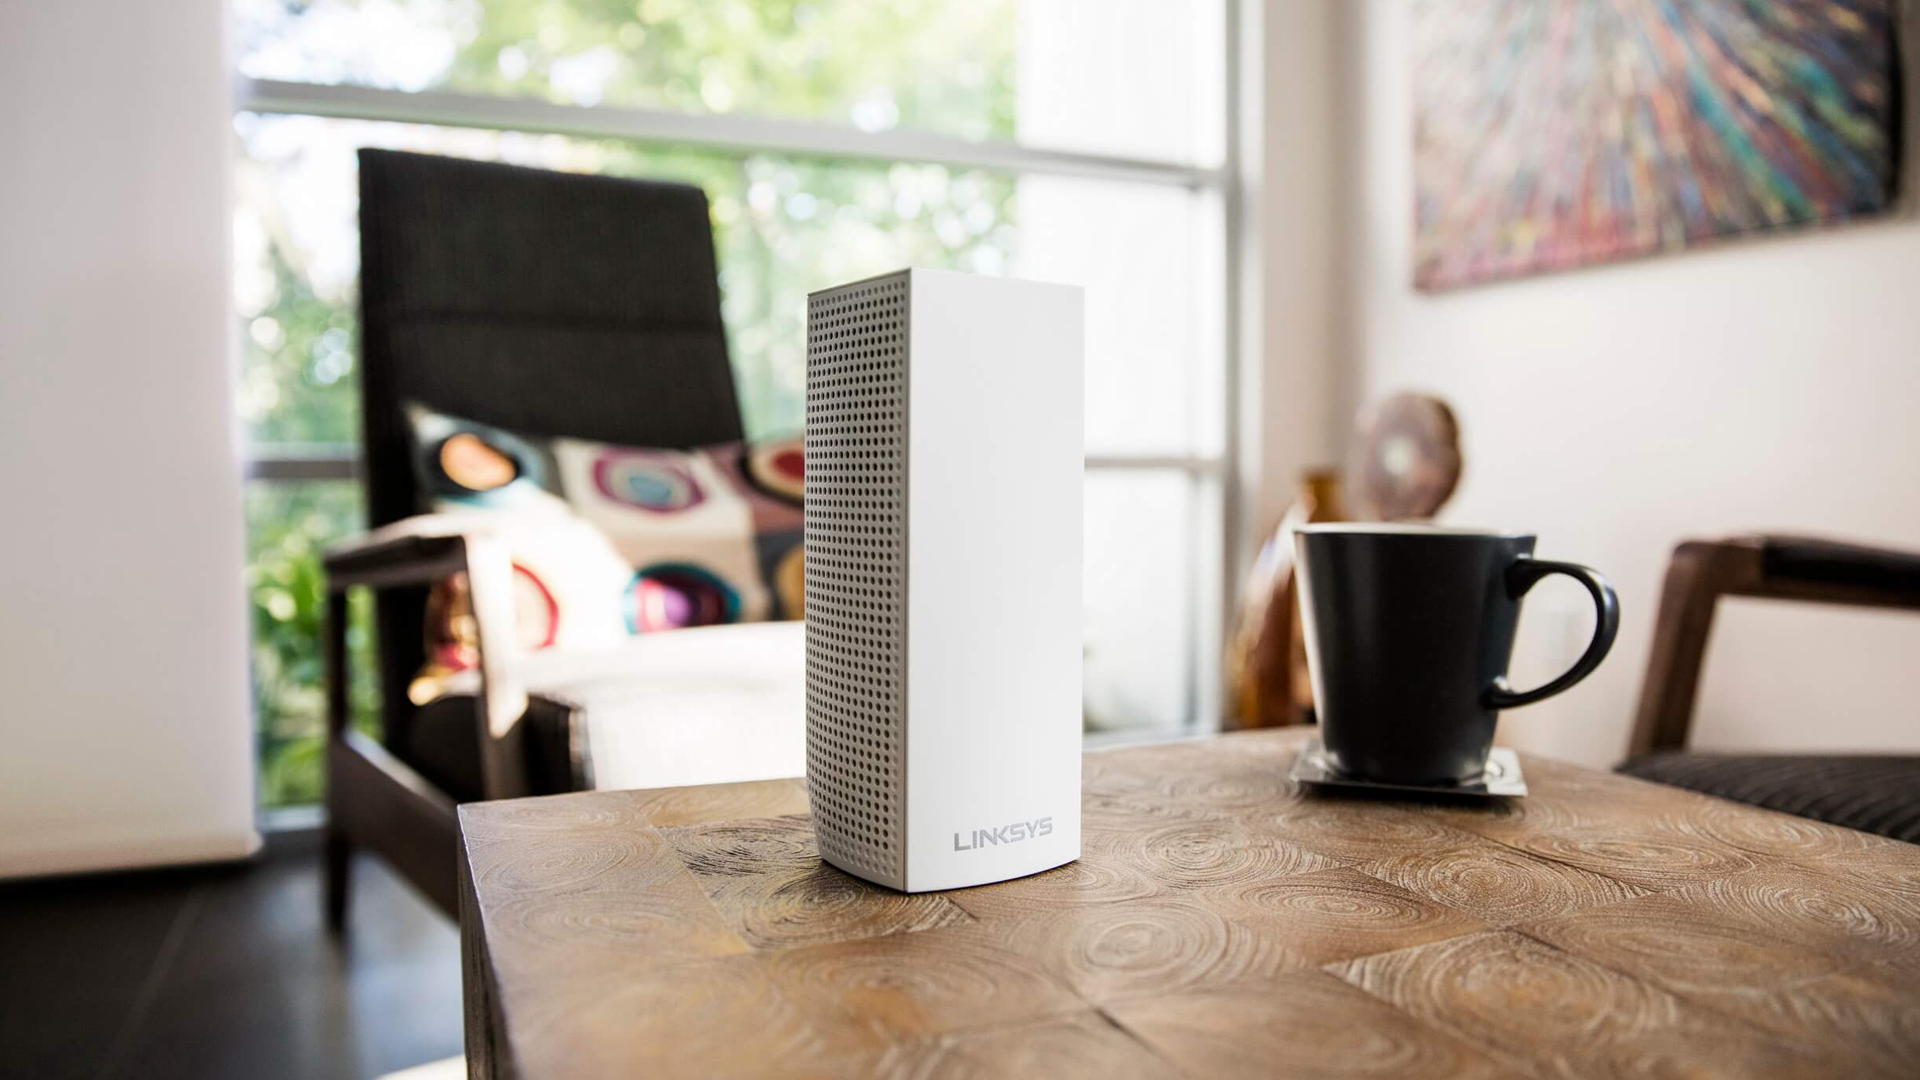 Fix Your Unreliable Wi-Fi With This Killer Mesh Router Deal – Review Geek